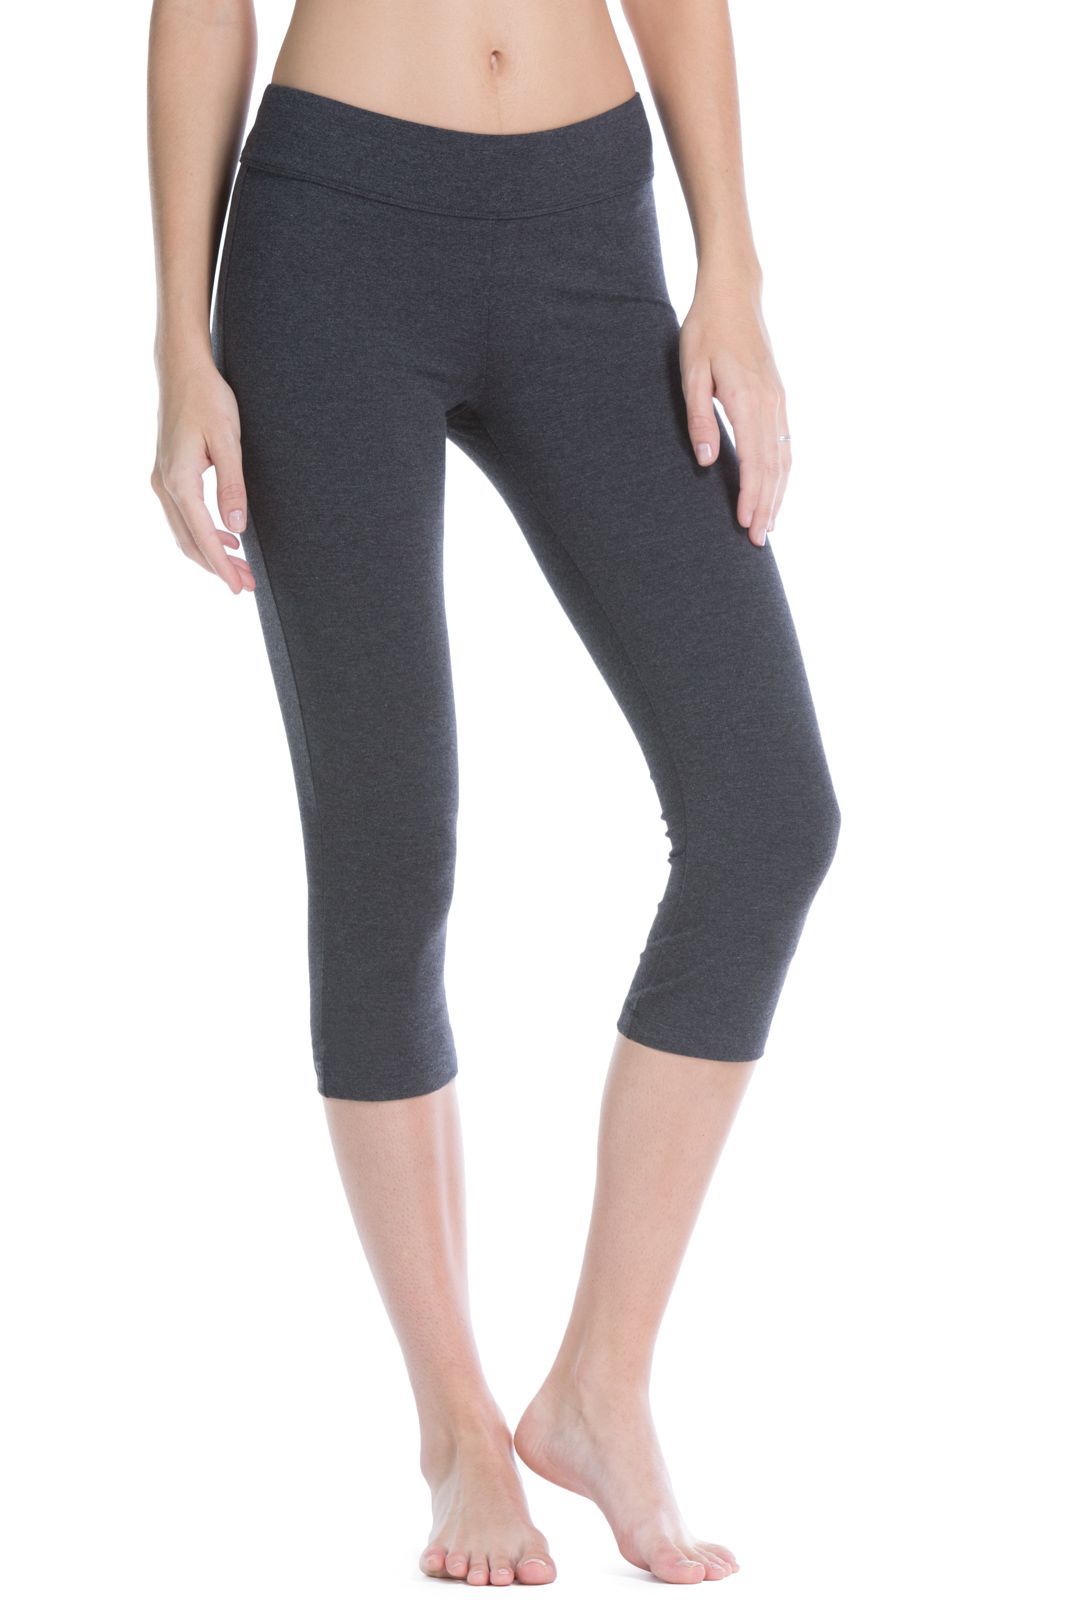 Athletic Works Womens Active Knit Capri (X-Large, Black) - Import It All